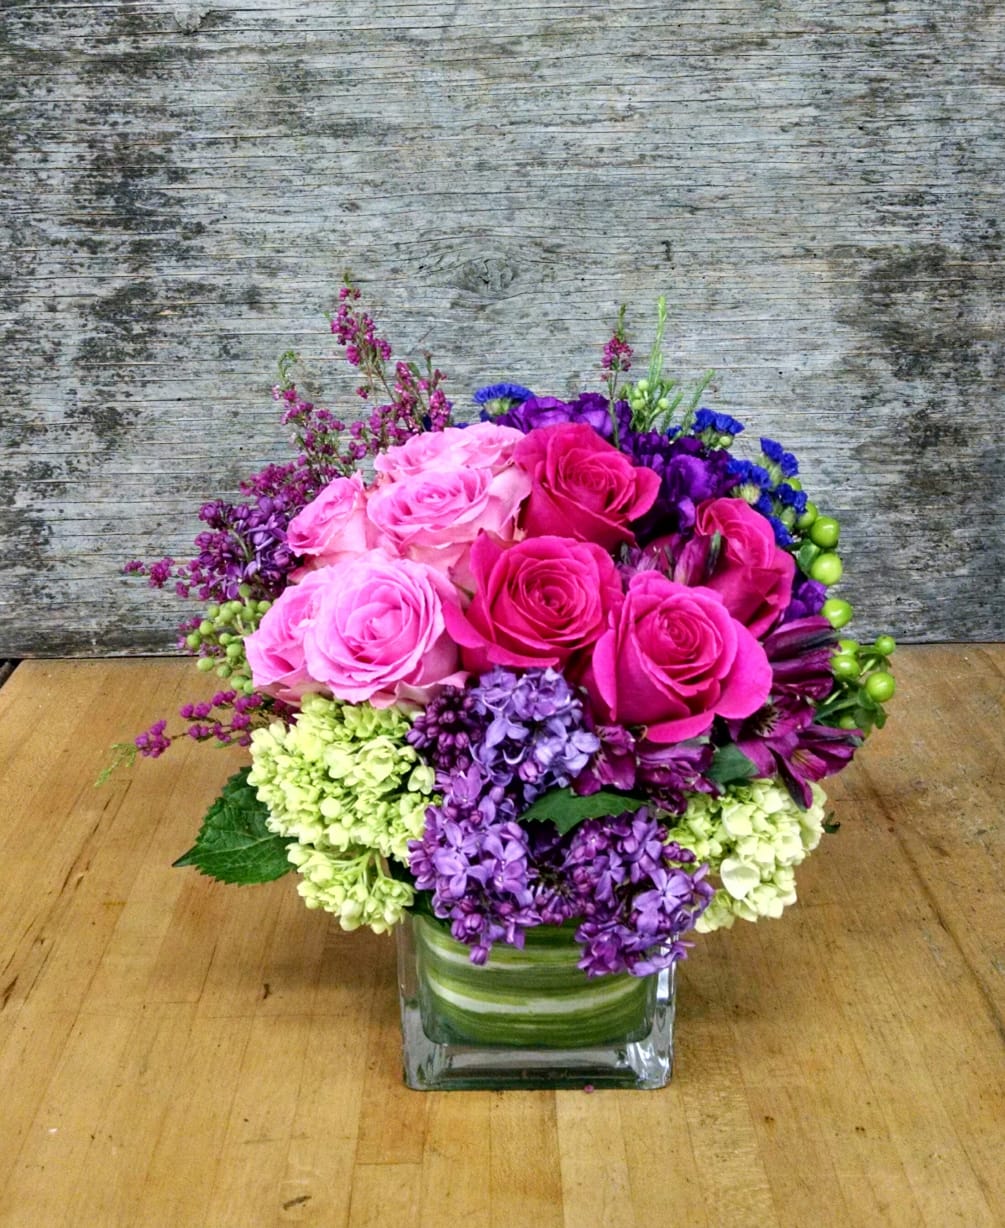 A lovely array of pink and hot pink roses, accented with the